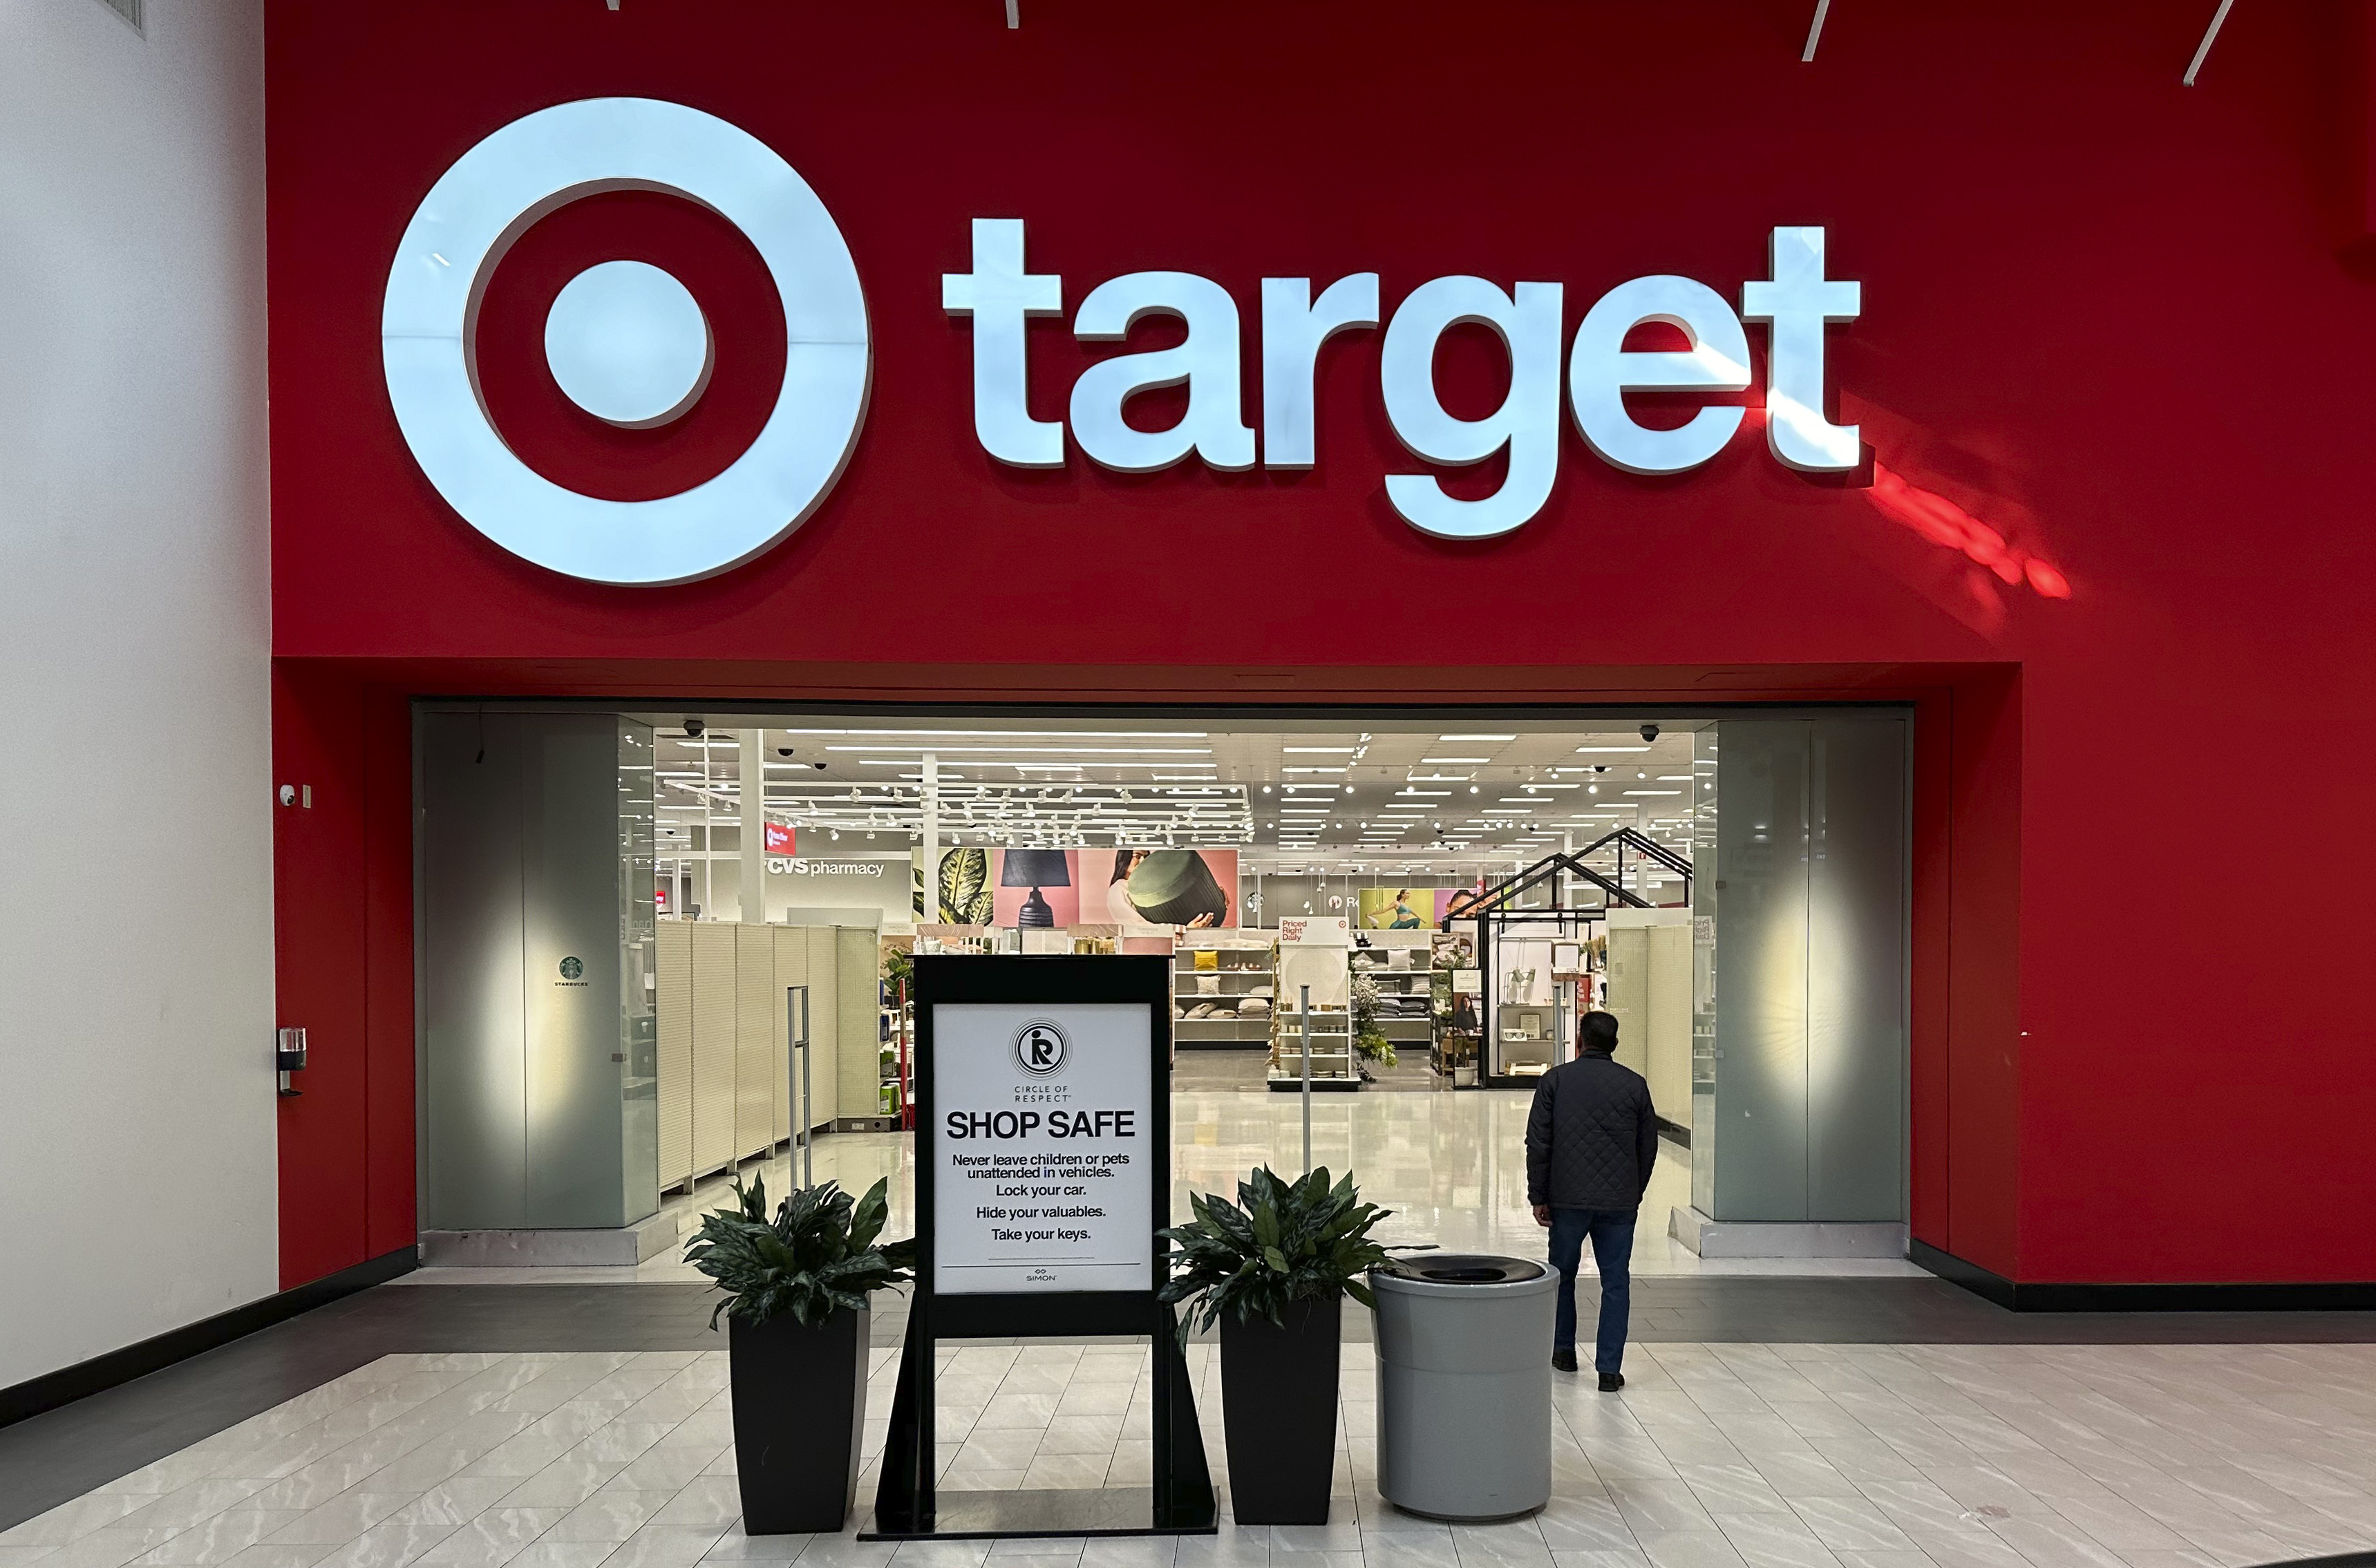 Target launches new paid membership program in a bid to drive sales